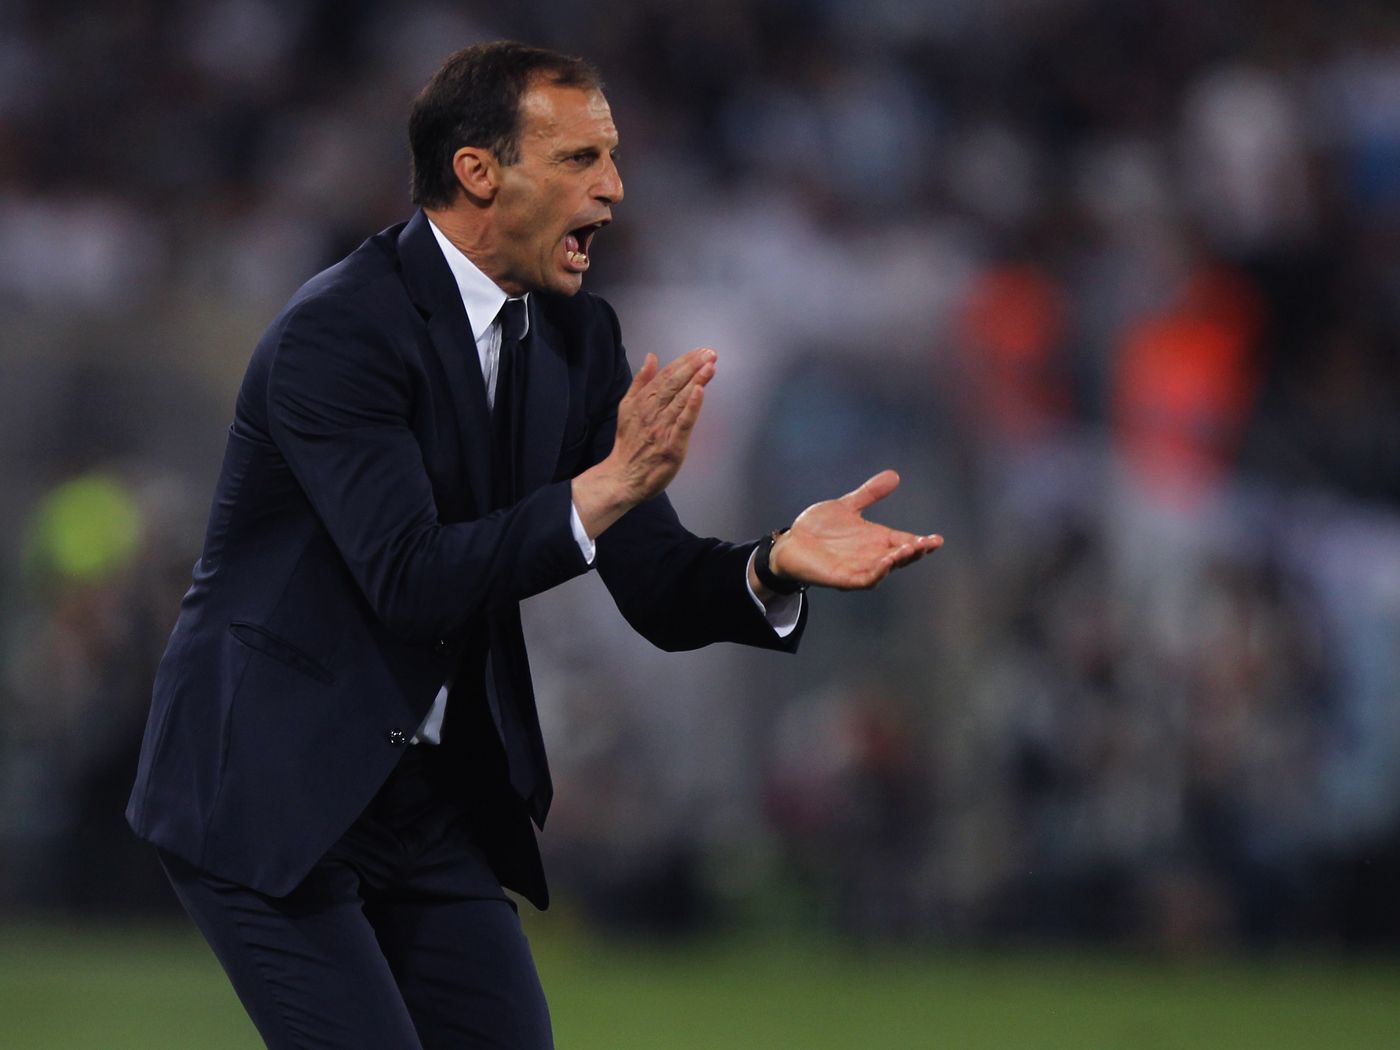 Juventus' Massimiliano Allegri named to 2017 Best FIFA Men's Coach award shortlist & White & Read All Over